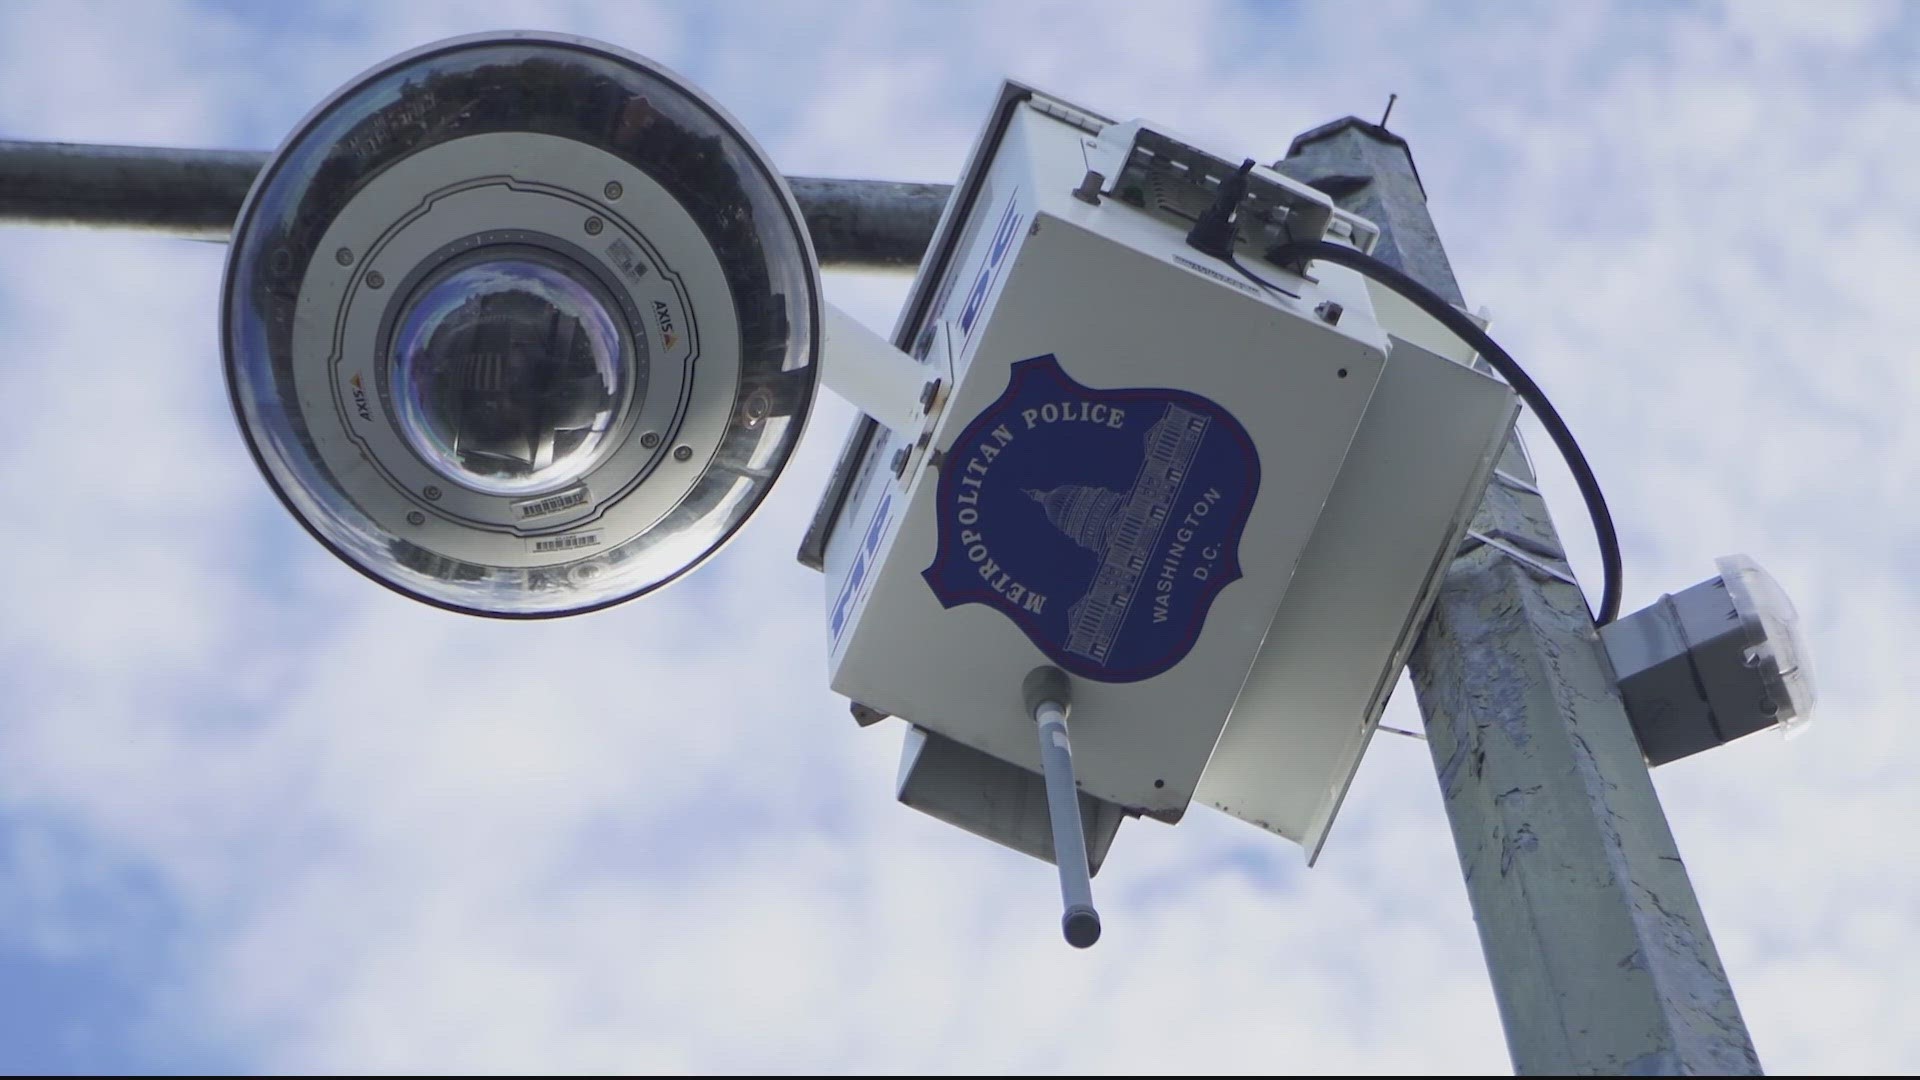 DC Police will launch a real time crime center -- charged with keeping an eye, LIVE, on the city's cameras. A partnership with 9 local and federal police agencies.